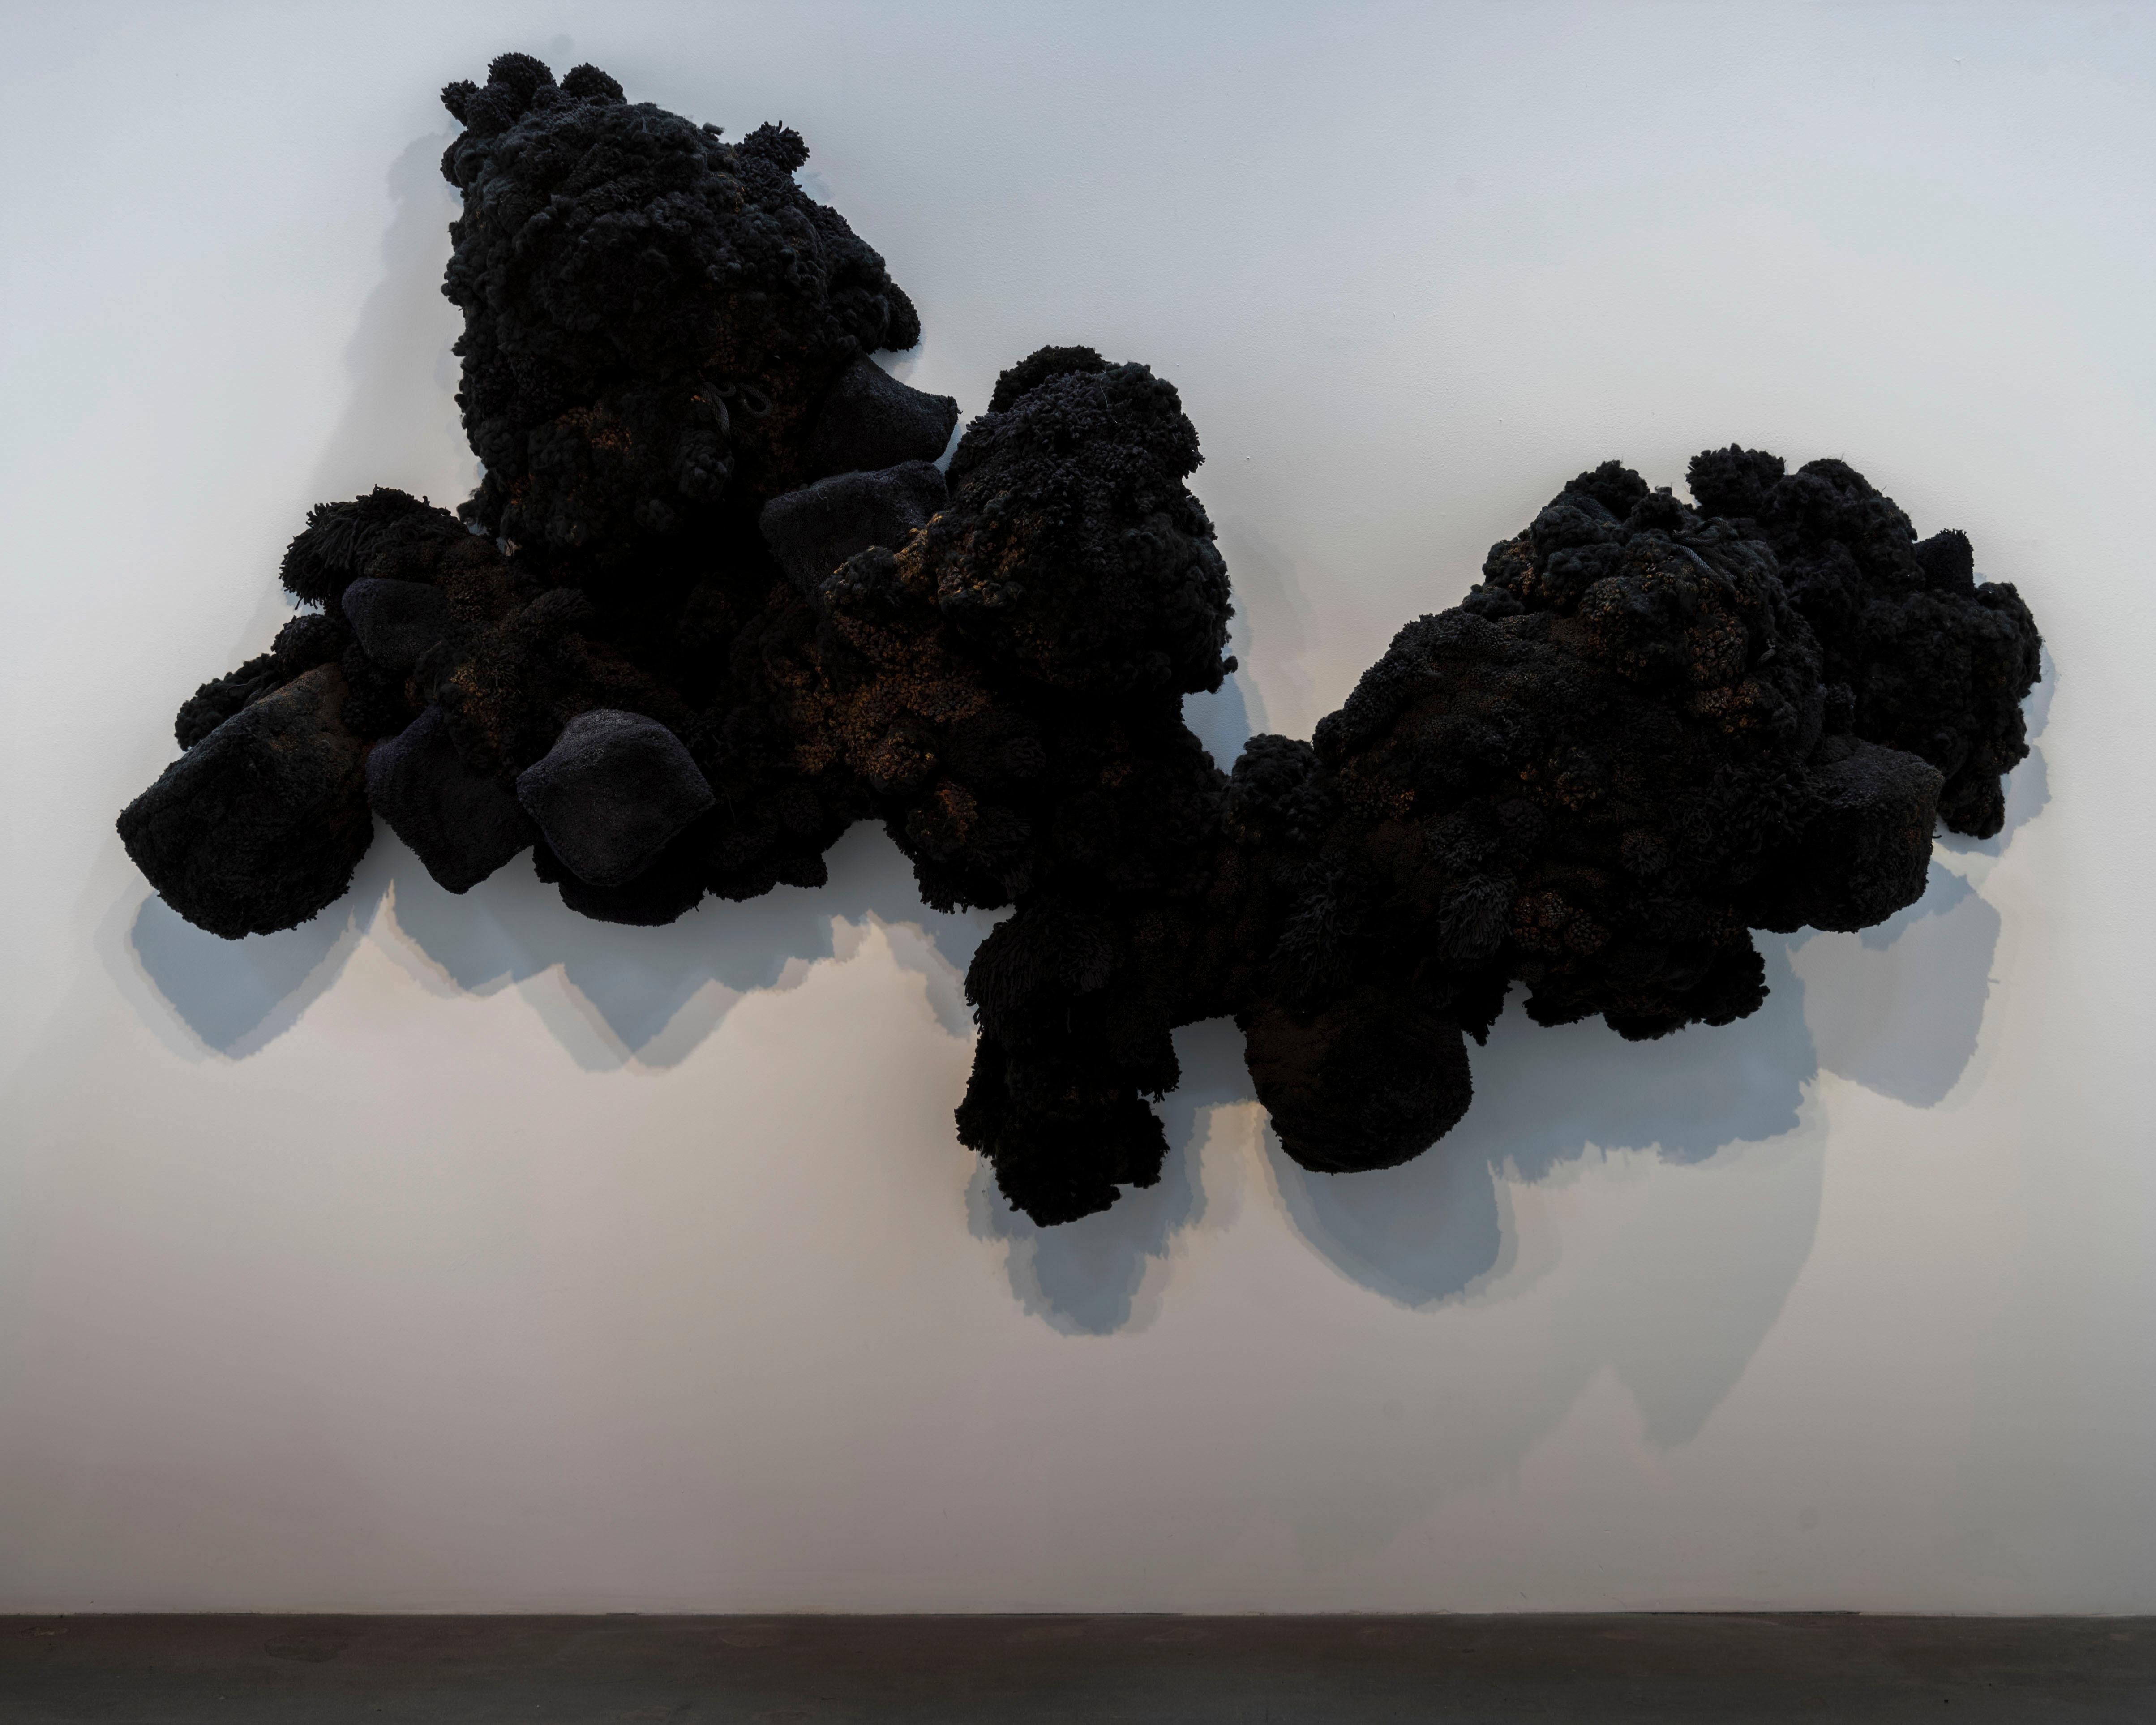 There and black sculpture by Mary Brogger
Unique sculpture. 2019
Dimensions: D 38 x W 317.5 x H 183 cm.
Materials: Hand tied singed acrylic yarn, mixed media.

Work is modular and can be recomposed to a degree by the artist.

Mary Brogger is